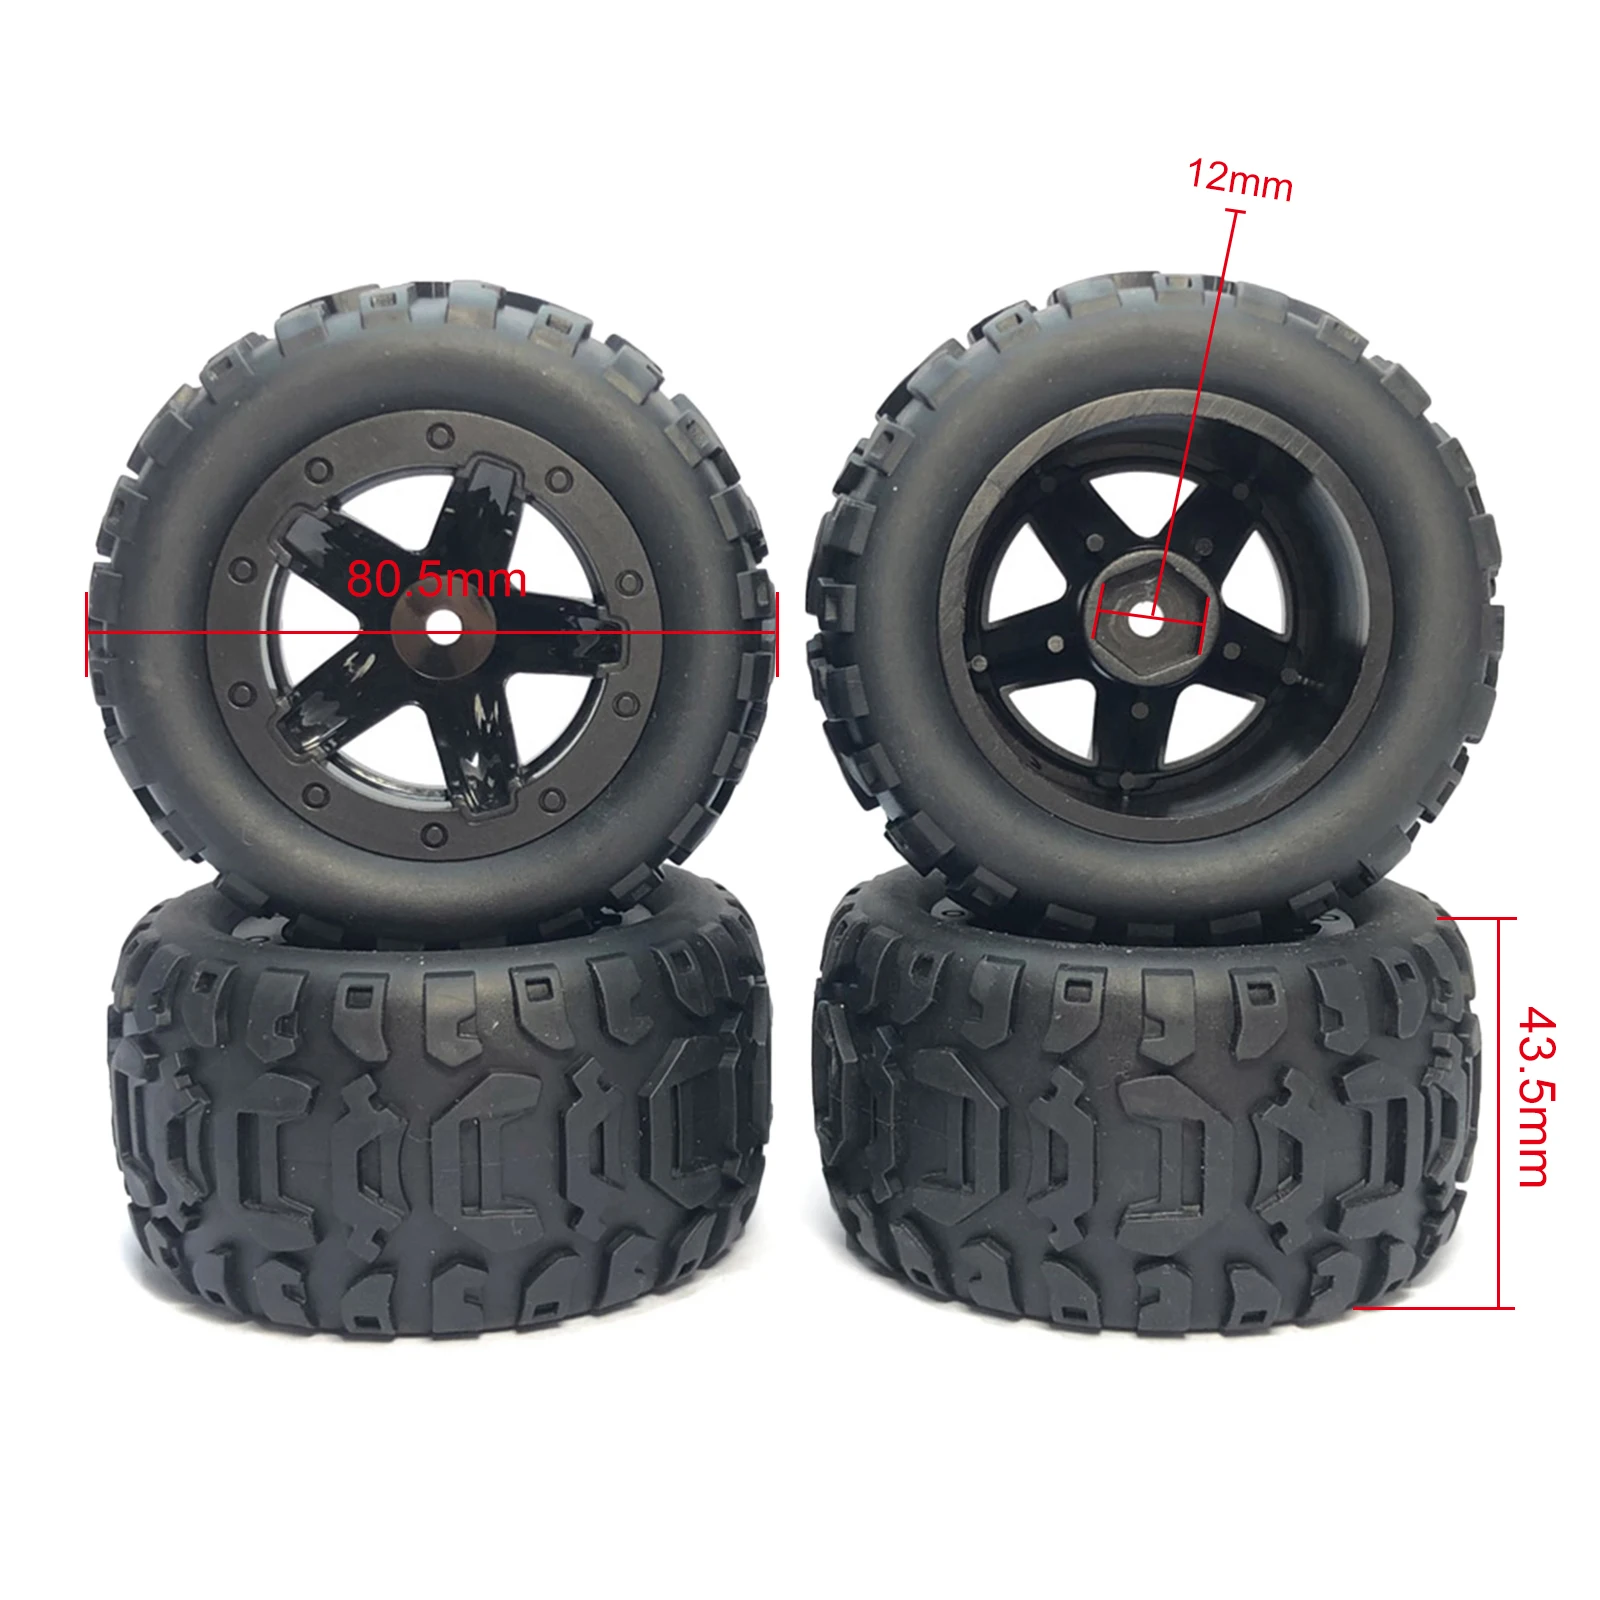 4pcs Wheel Tires Anti Slip Rubber Wheel Tires Tyre Wear-resistant Off-road Vehicle Tires Soft for Wltoys 144001 124018 HBX 16889 images - 6